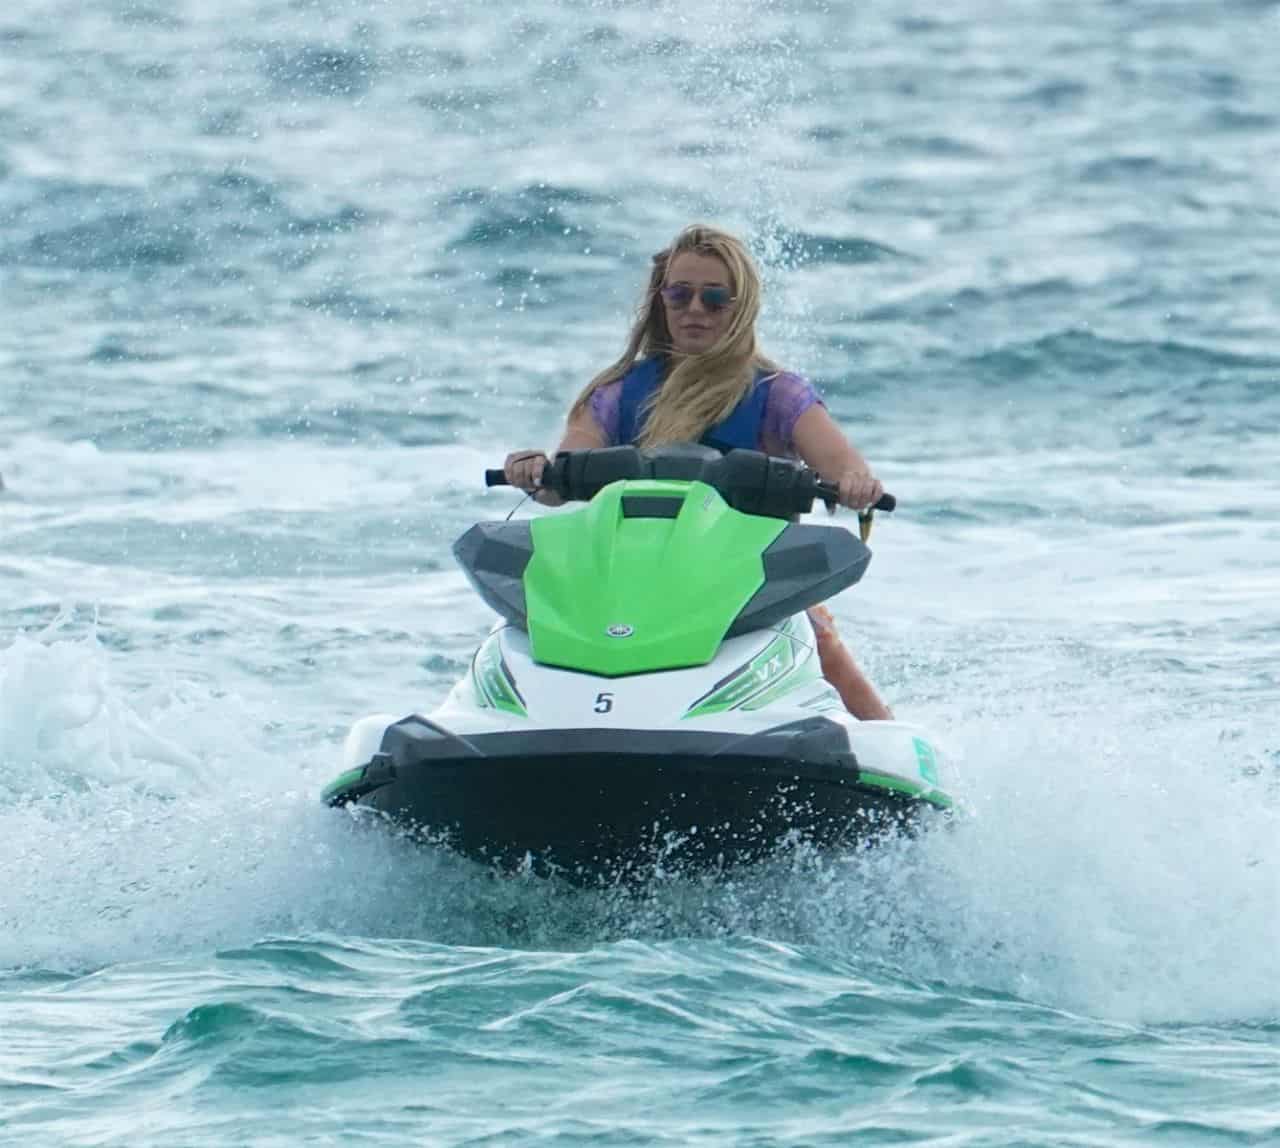 Britney Spears Stuns in Shakti Bikini with Sheer Cover-Up at Miami Beach